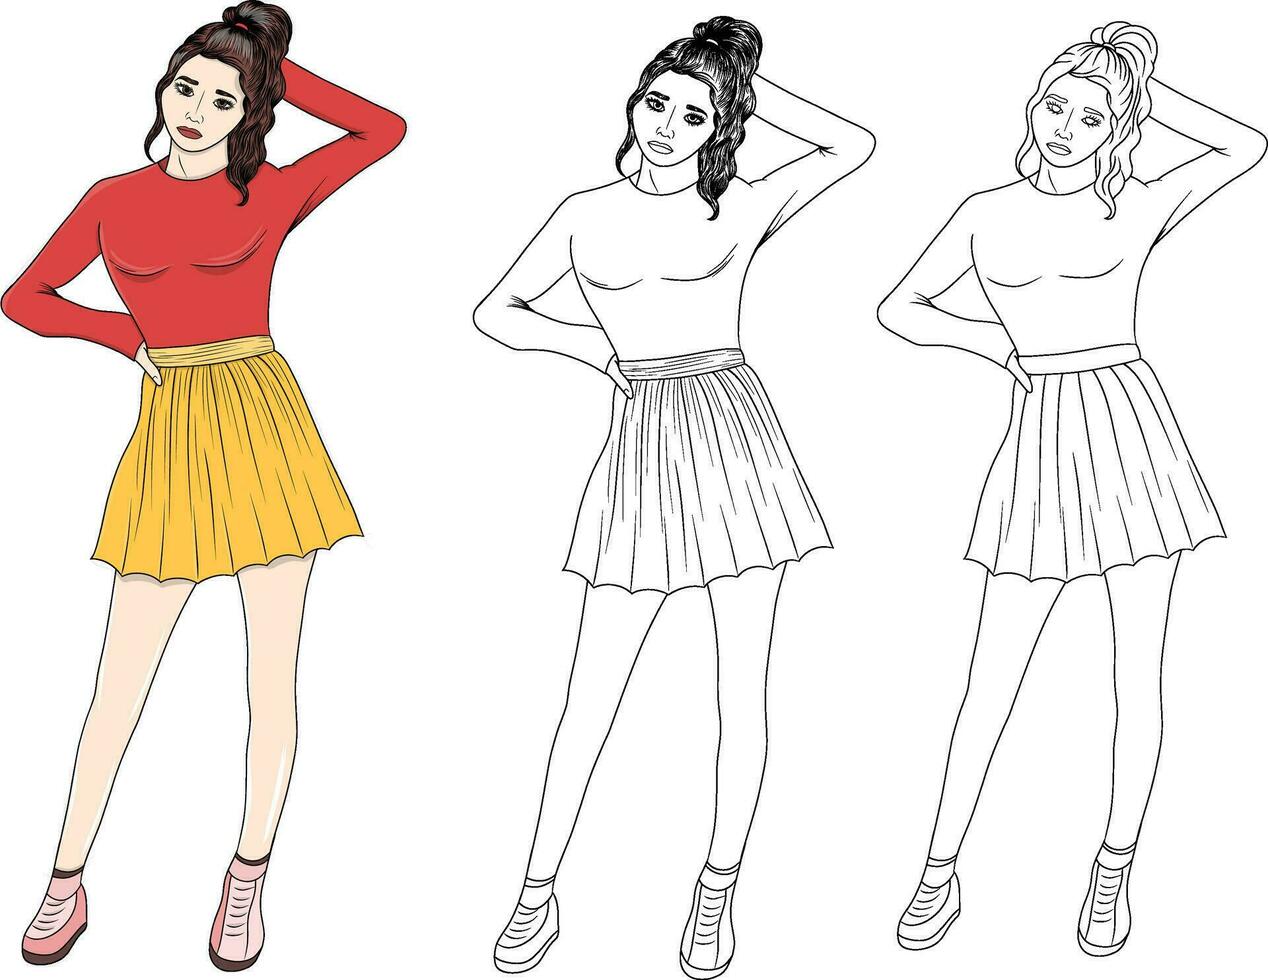 Cute Standing Hand Drawn Lady Collection vector